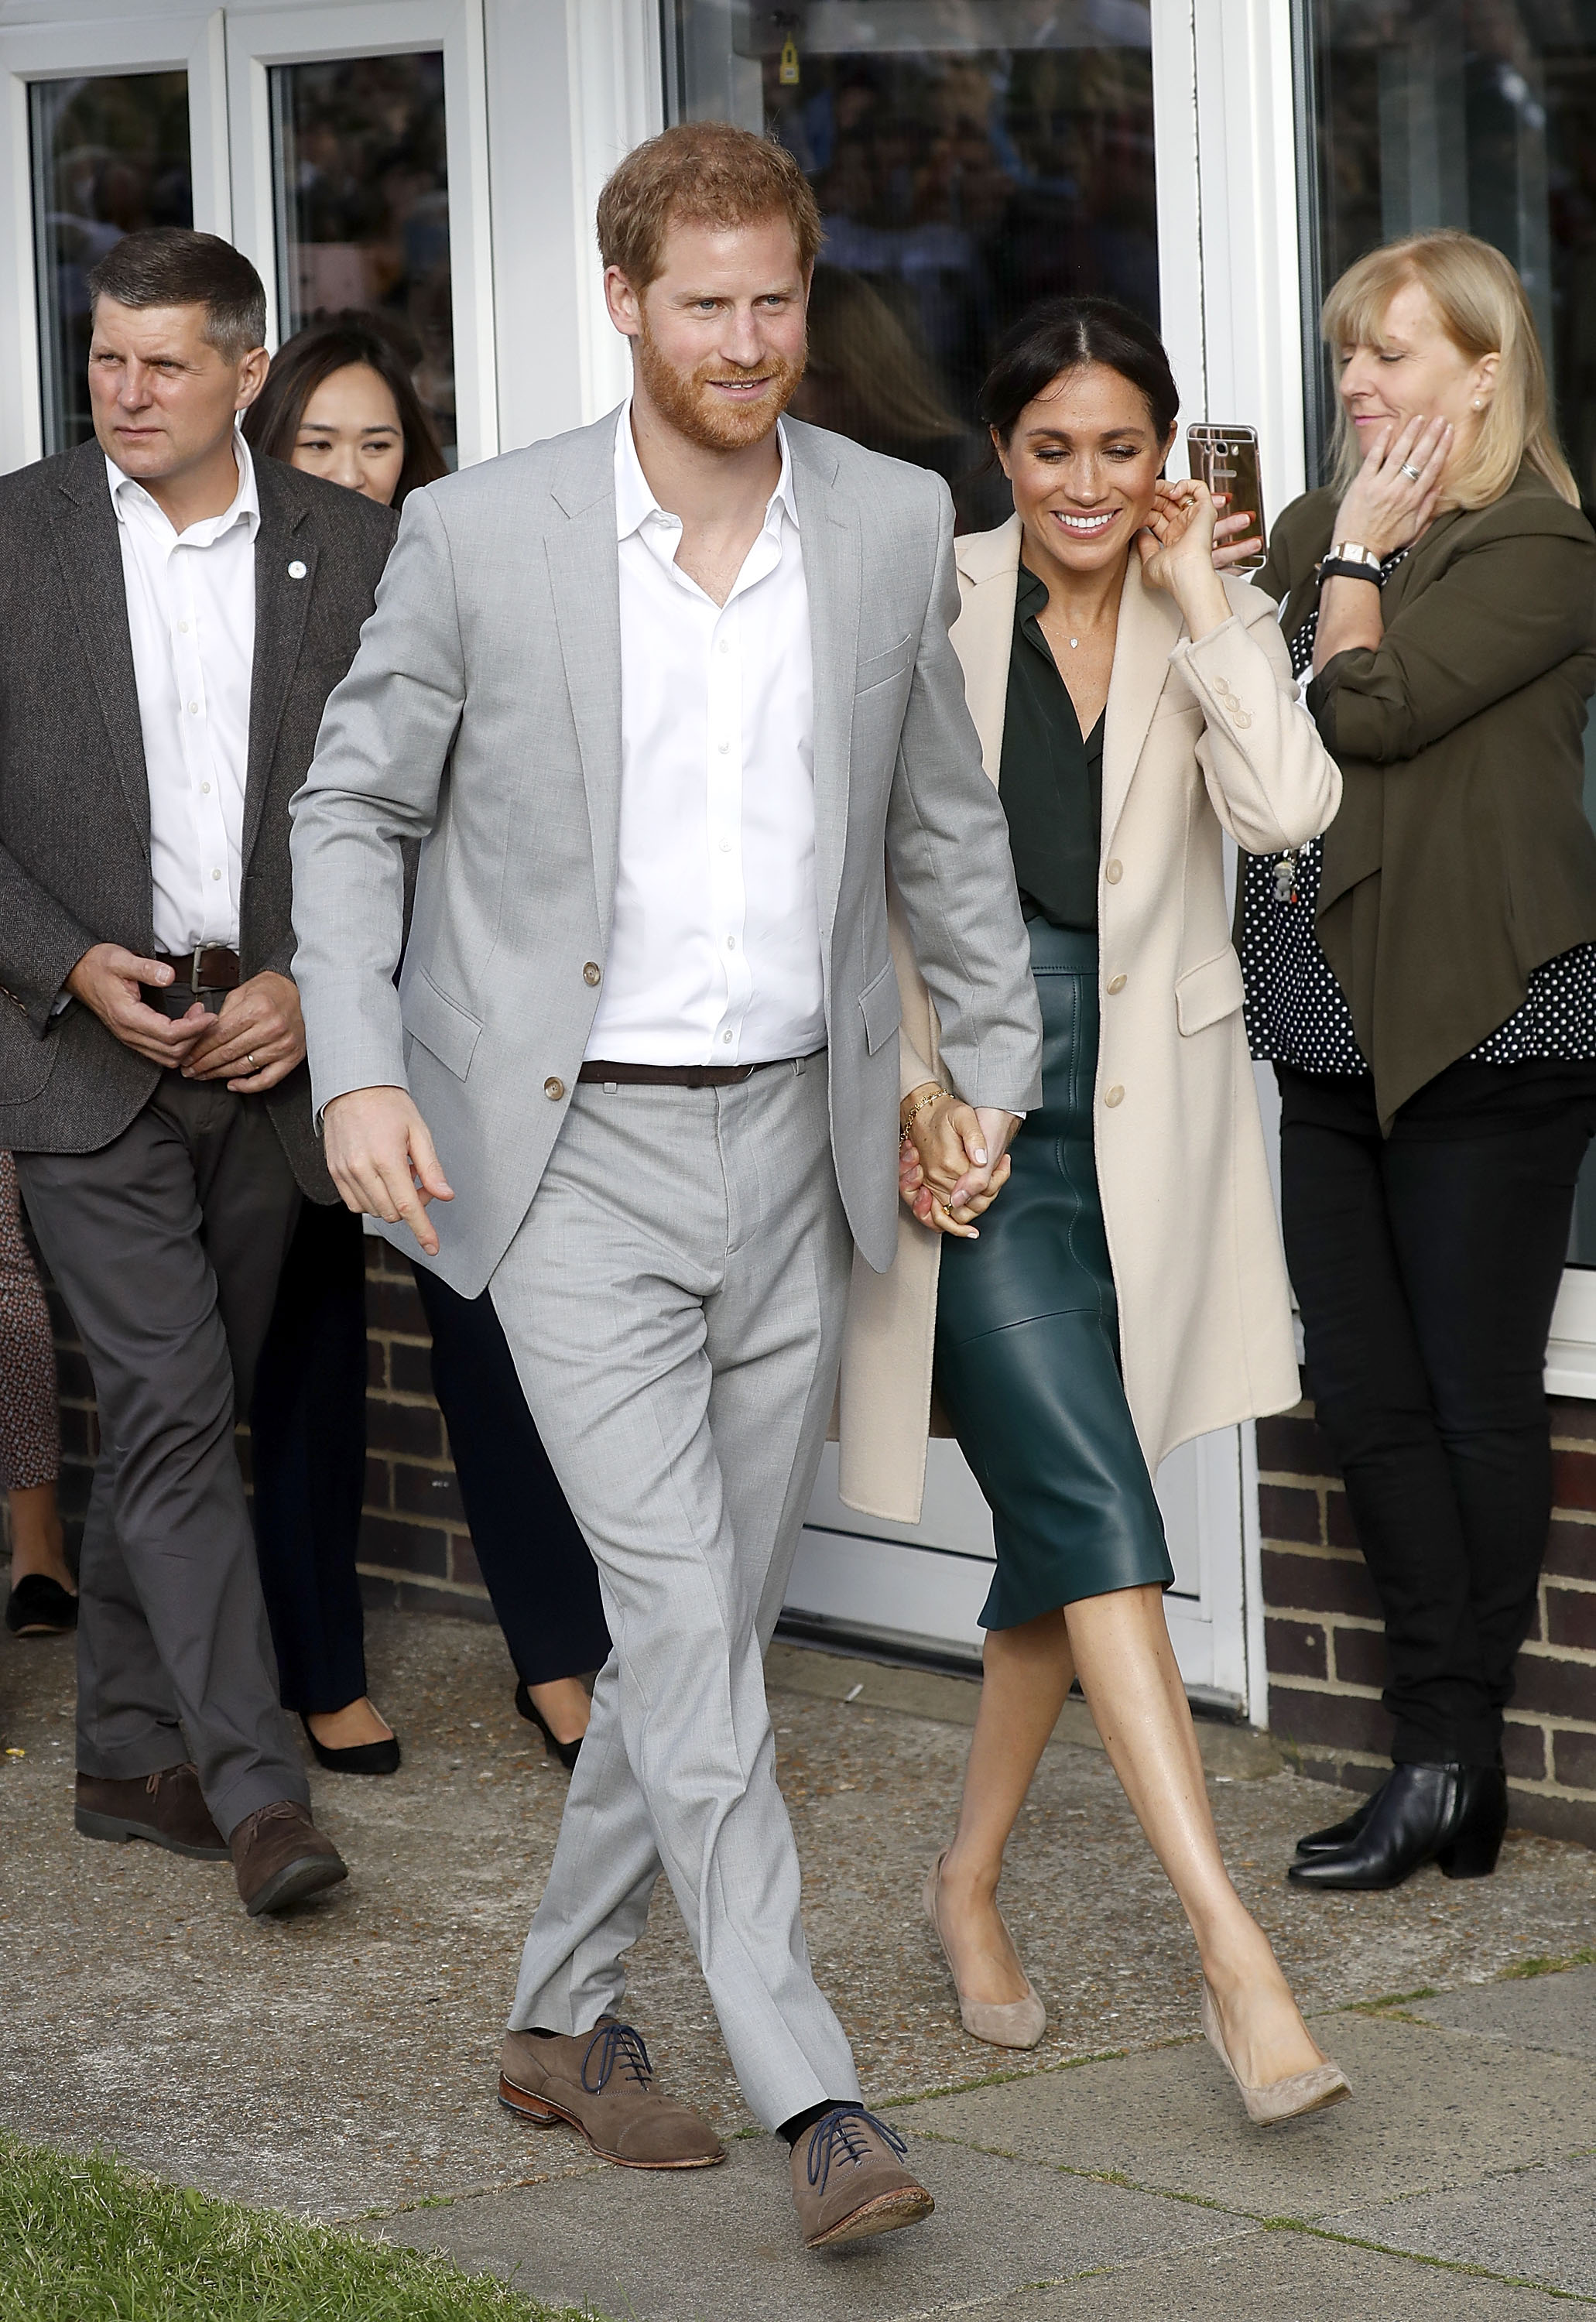 PEACEHAVEN, UNITED KINGDOM - OCTOBER 03: Meghan, Duchess of Sussex and Prince Harry, Duke of Sussex make an official visit to the Joff Youth Centre in Peacehaven, Sussex on October 3, 2018 in Peacehaven, United Kingdom. The Duke and Duchess married on May 19th 2018 in Windsor and were conferred The Duke & Duchess of Sussex by The Queen. (Photo by Chris Jackson/Getty Images)